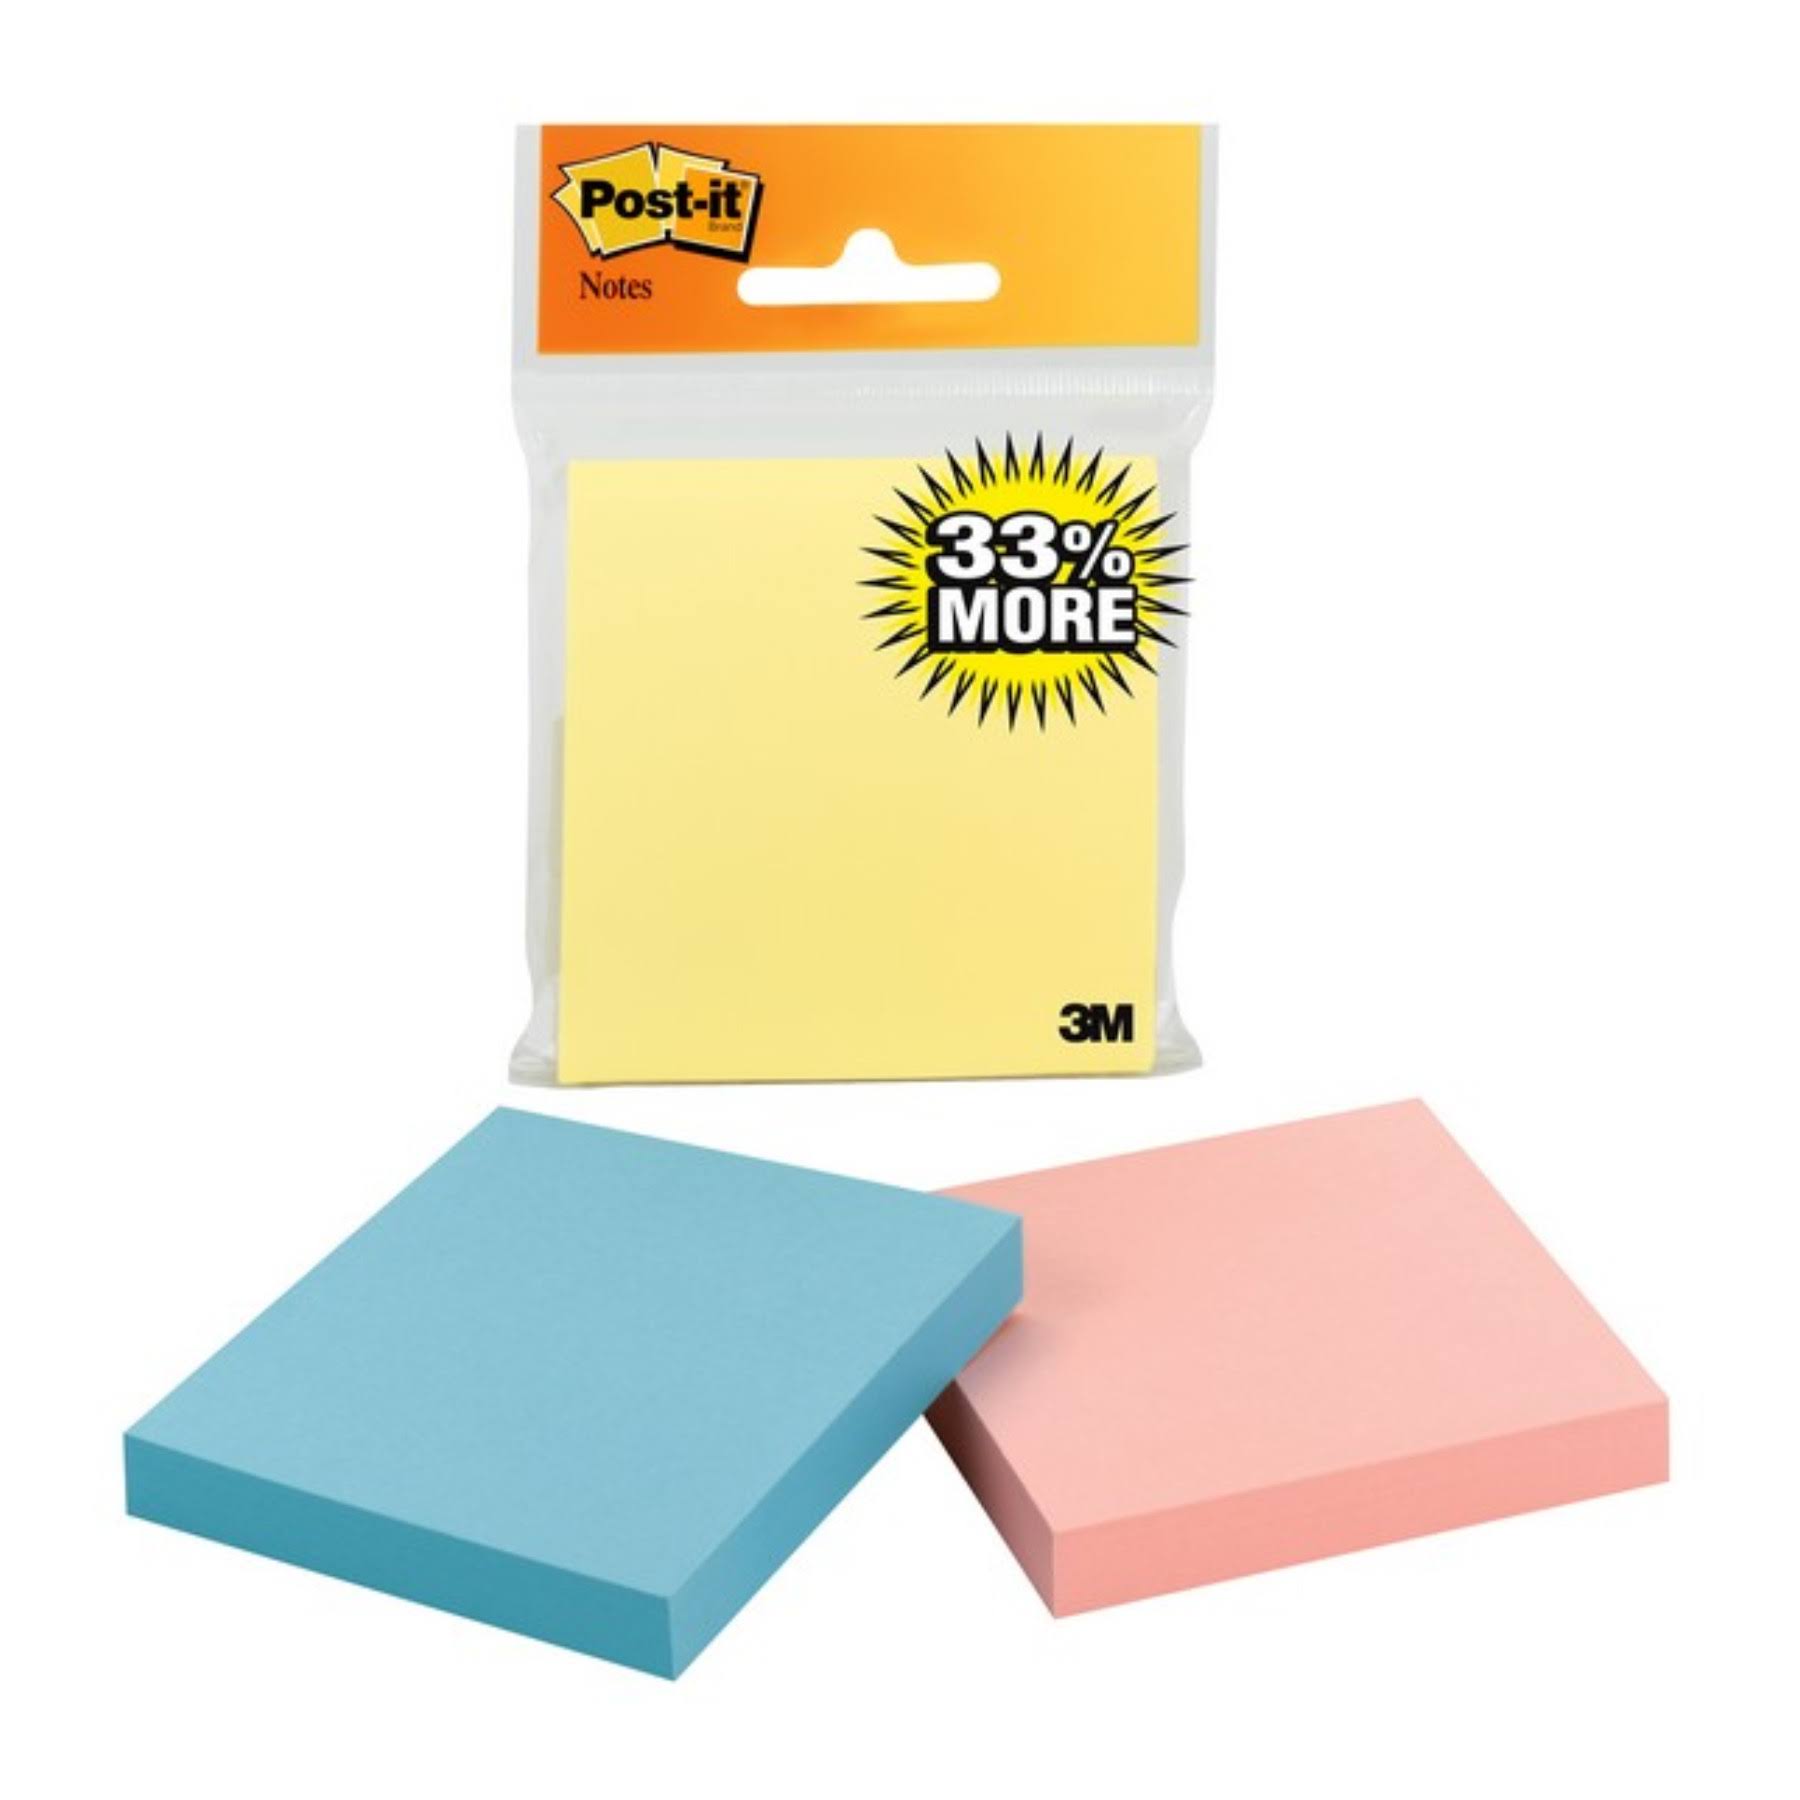 3M Post-it Notes - Pastel Collection, 3" x 3"